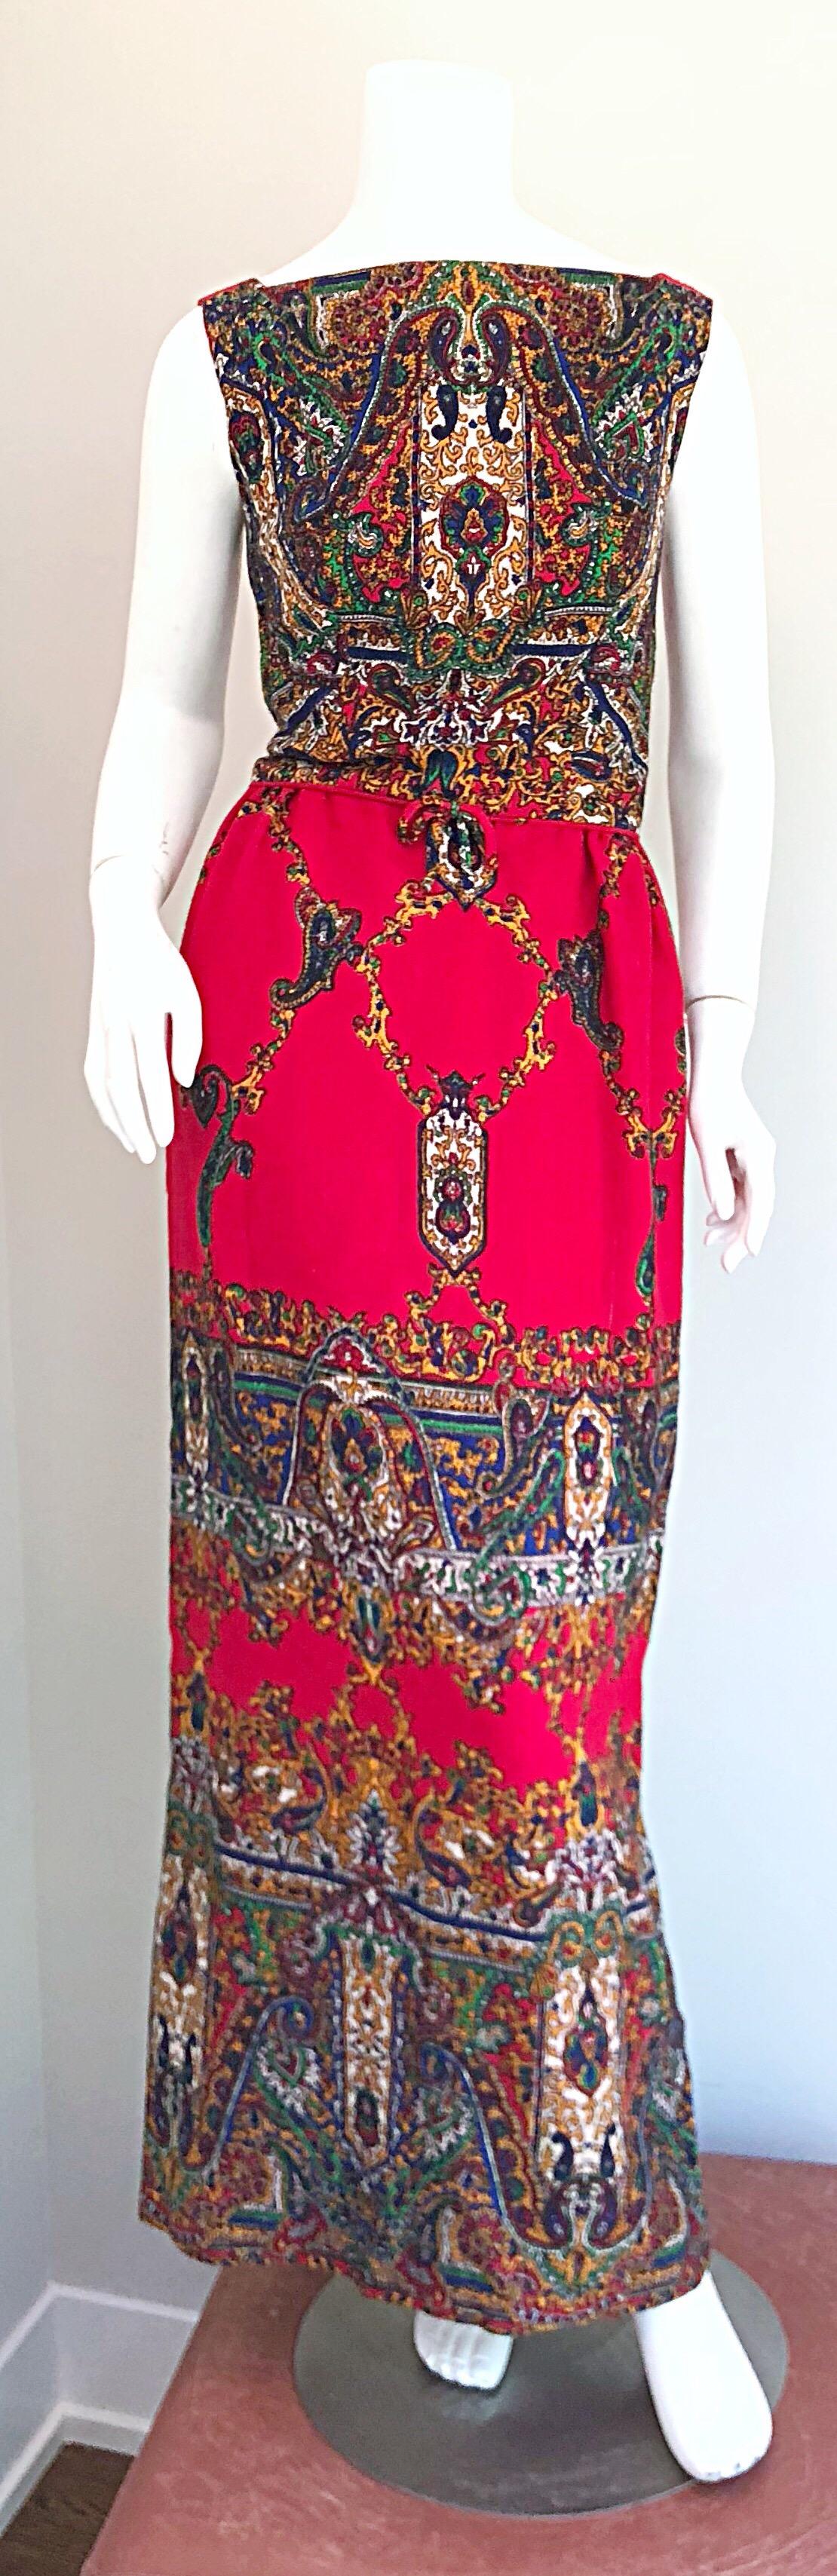 Fabulous early 1970s lightweight wool boho chic paisley print maxi dress! Features a red background with vibrant hues of blue, green, yellow and orange throughout. Open back reveals just the right amount of skin. Fully lined. Full metal zipper up